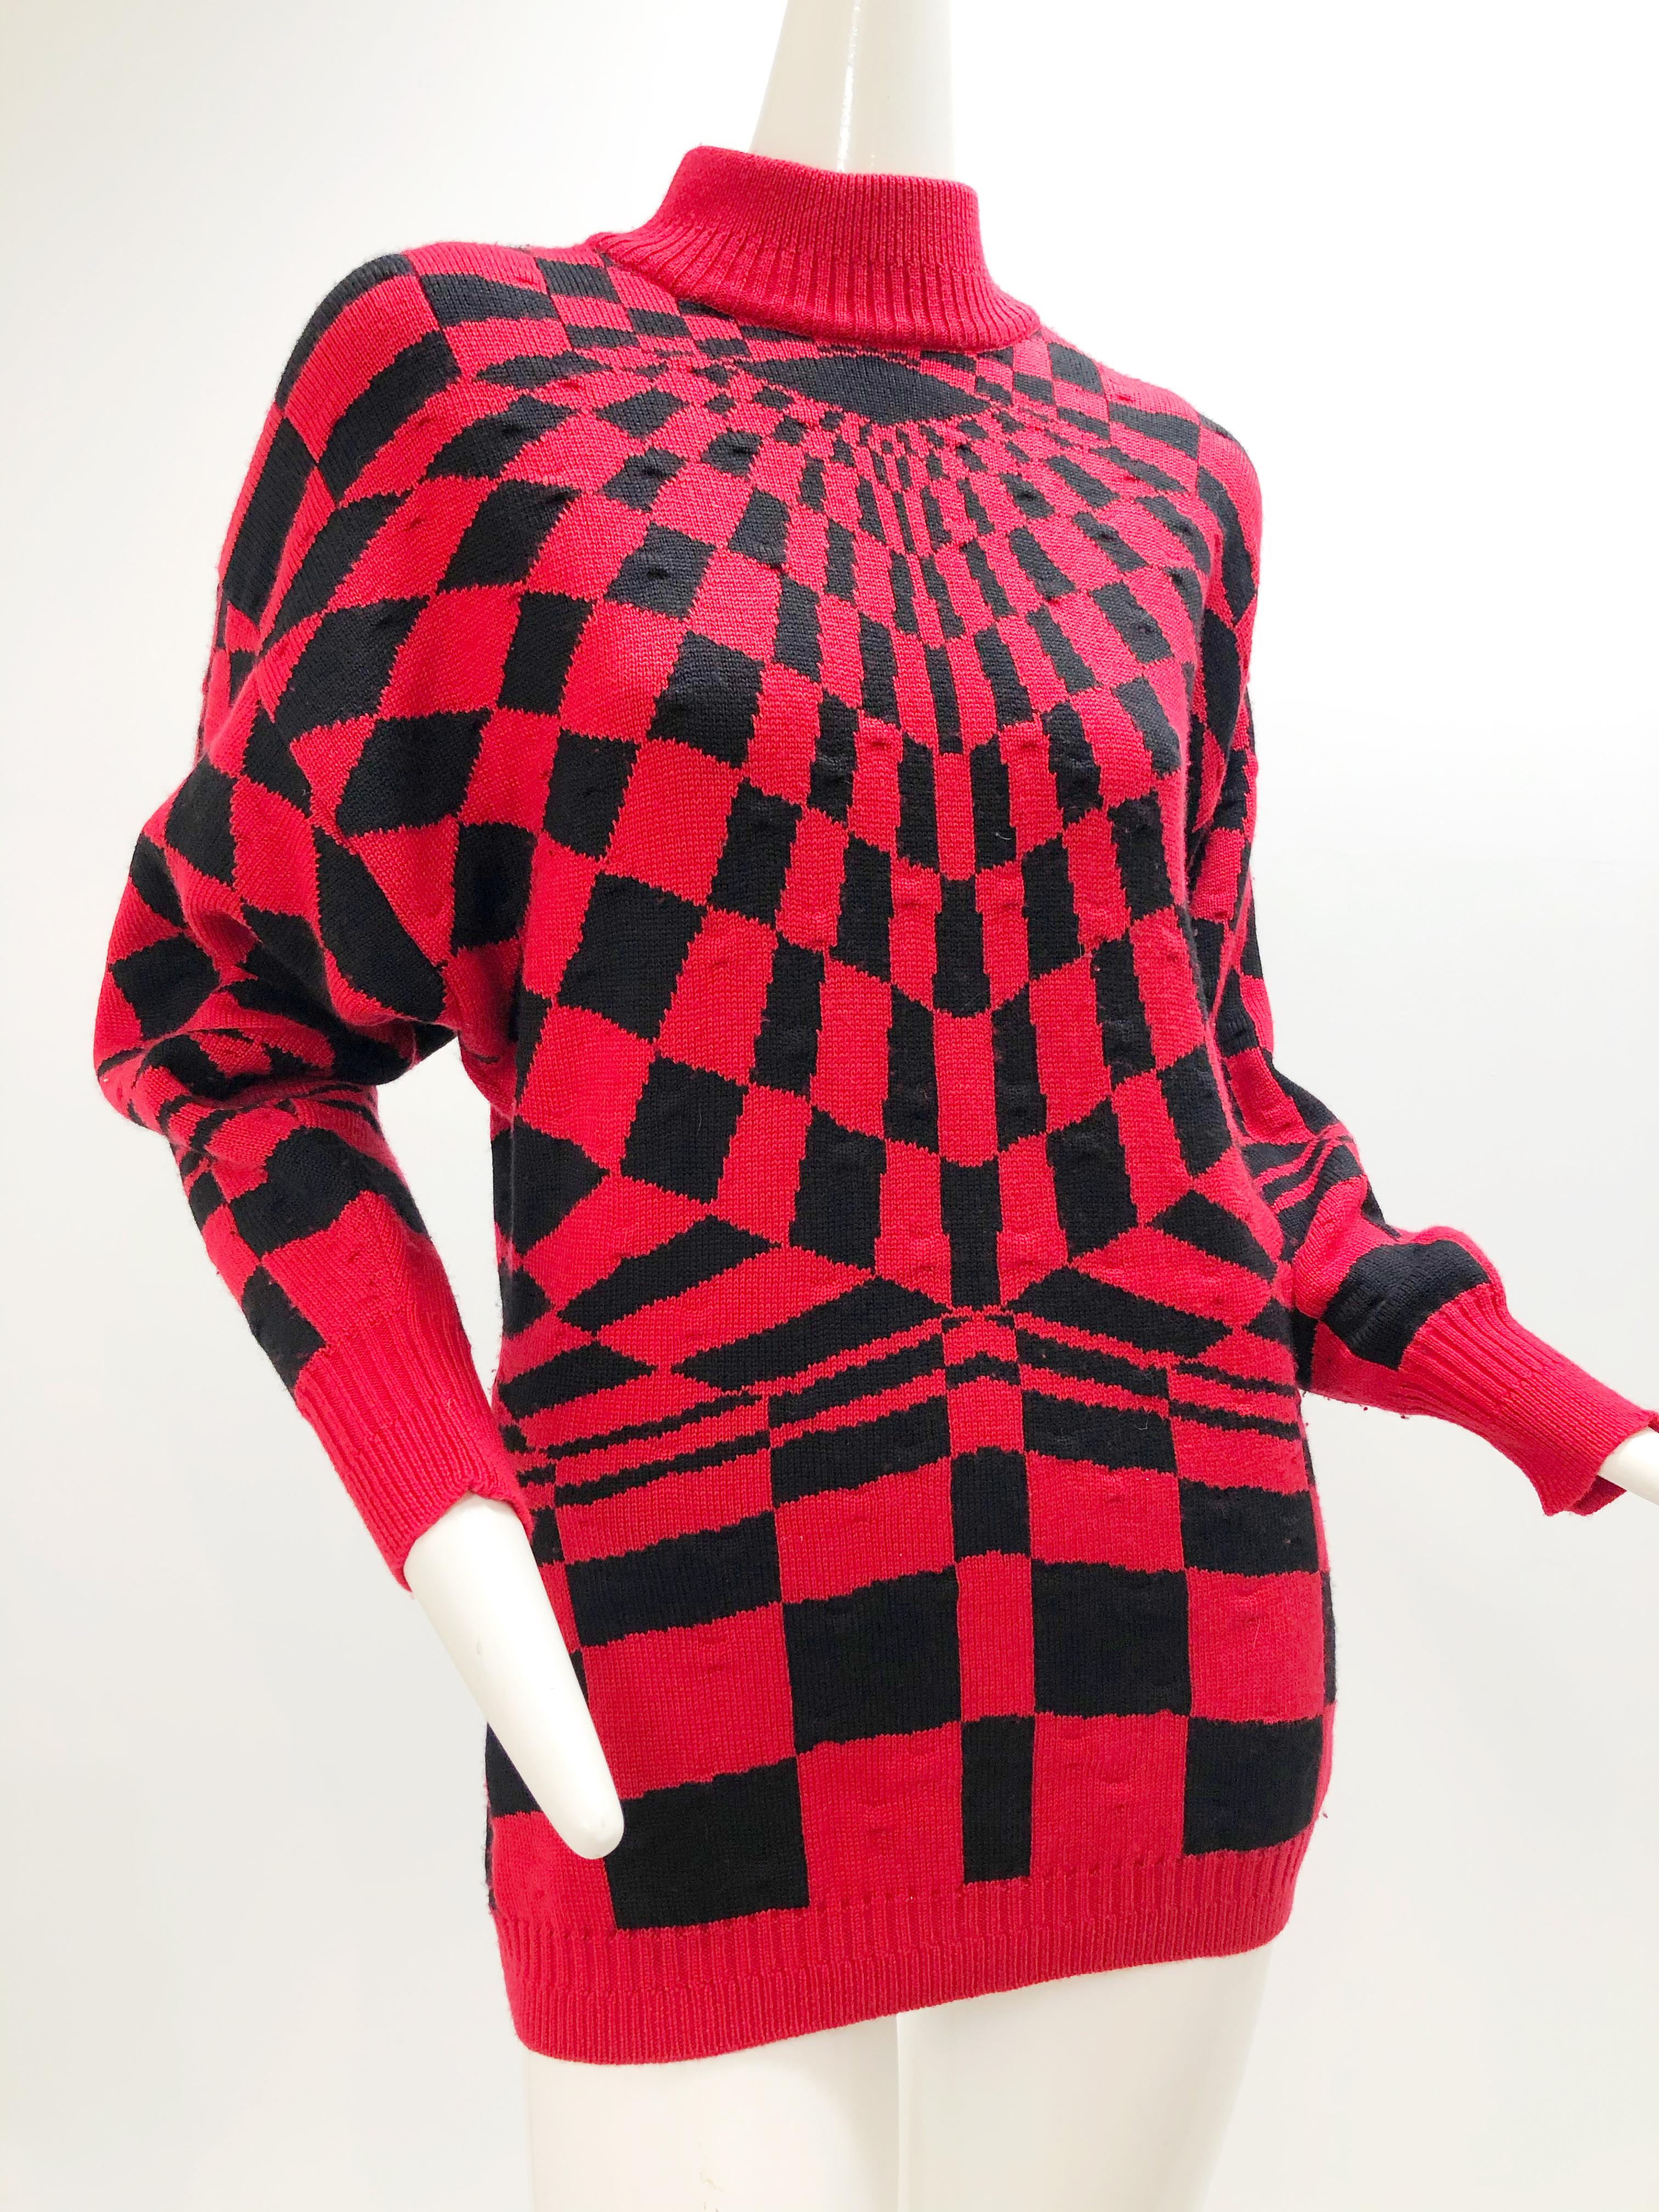 1980s Gianni Versace 3-Piece Knit Skirt Sweater & Scarf in Mod Red Checkerboard 5